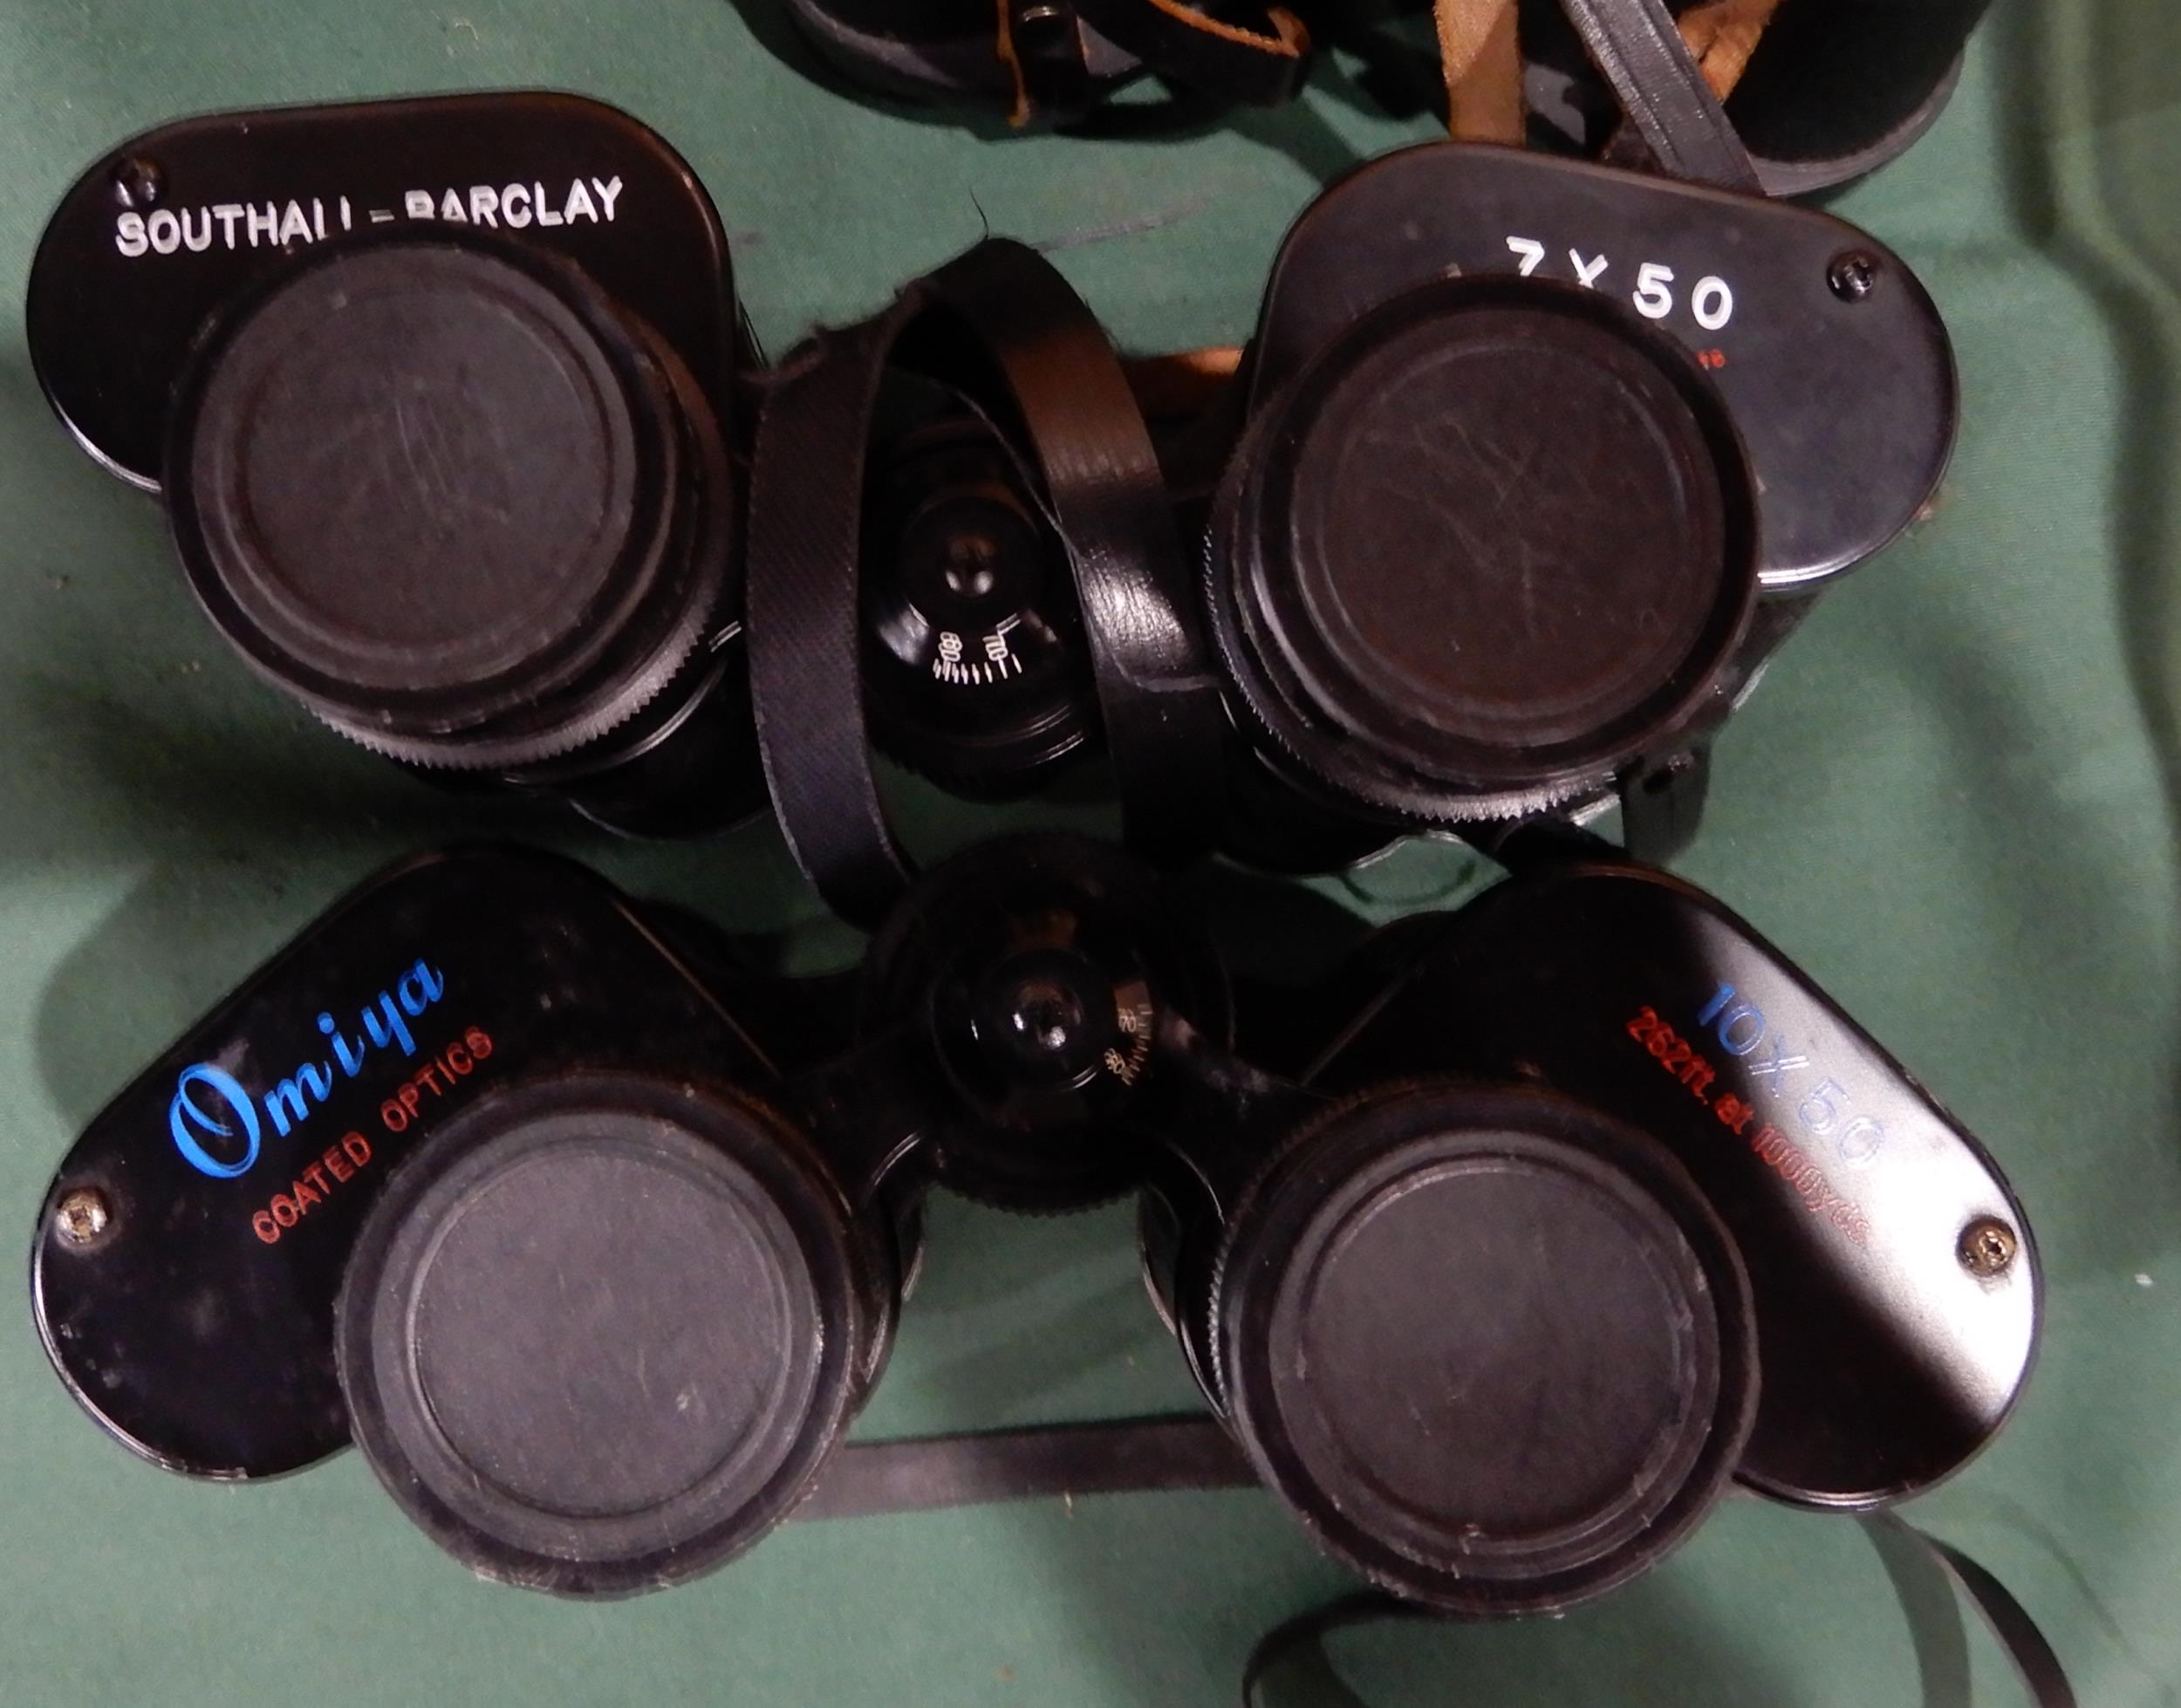 A quantity of binoculars with various makers and models with Nikon, Pentax, E. Leitz, Carl Zeiss, - Image 16 of 19